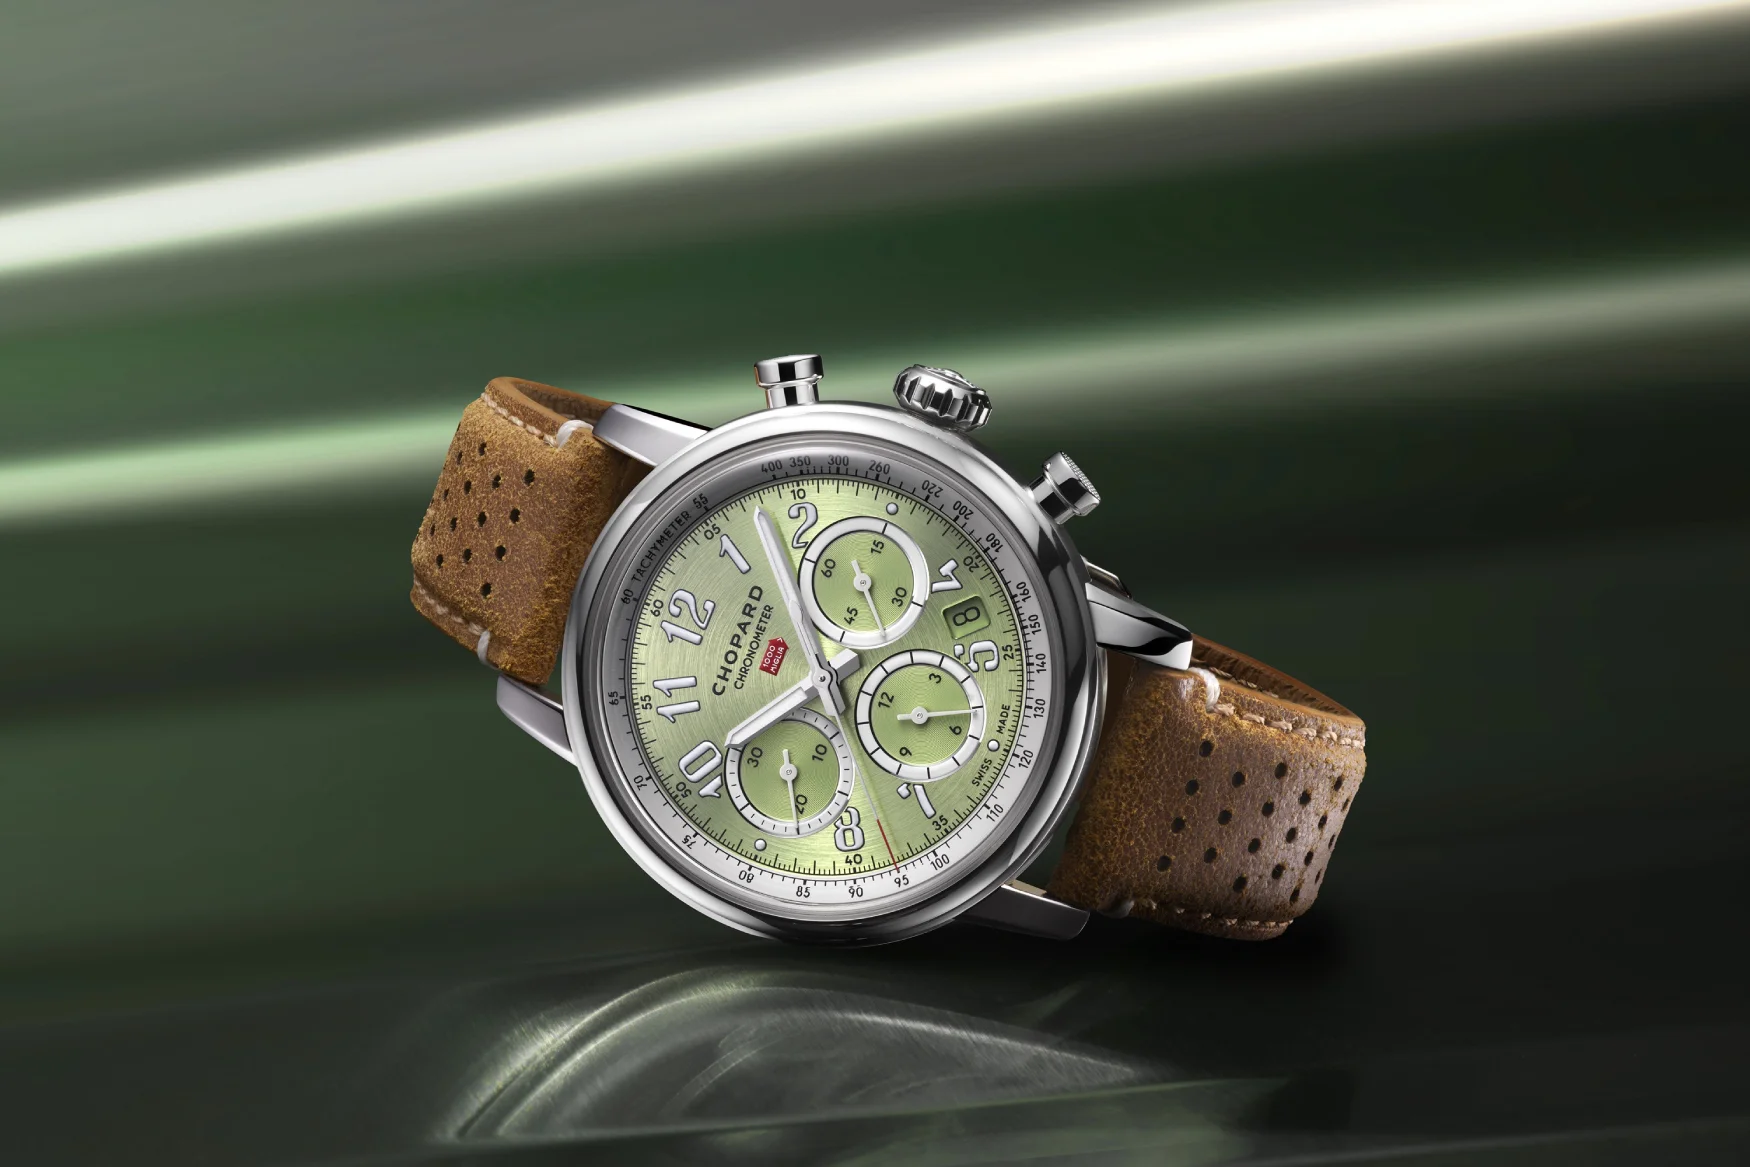 The Chopard Mille Miglia is Back in Five New Colors